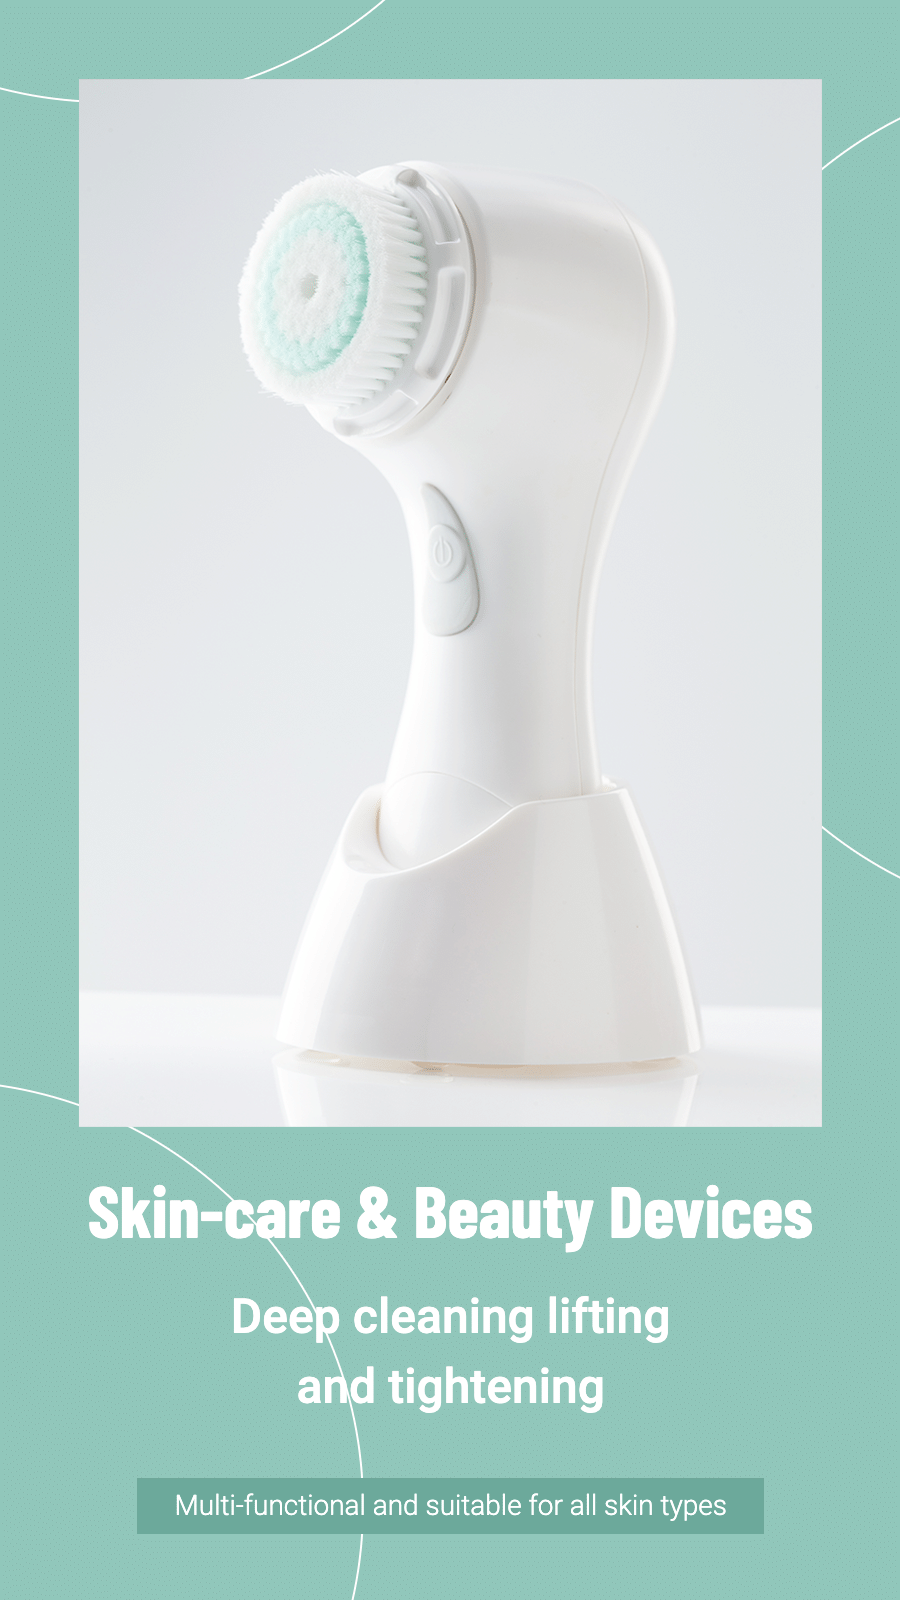 Skincare Beauty Devices Propaganda Template Poster Ecommerce Story预览效果